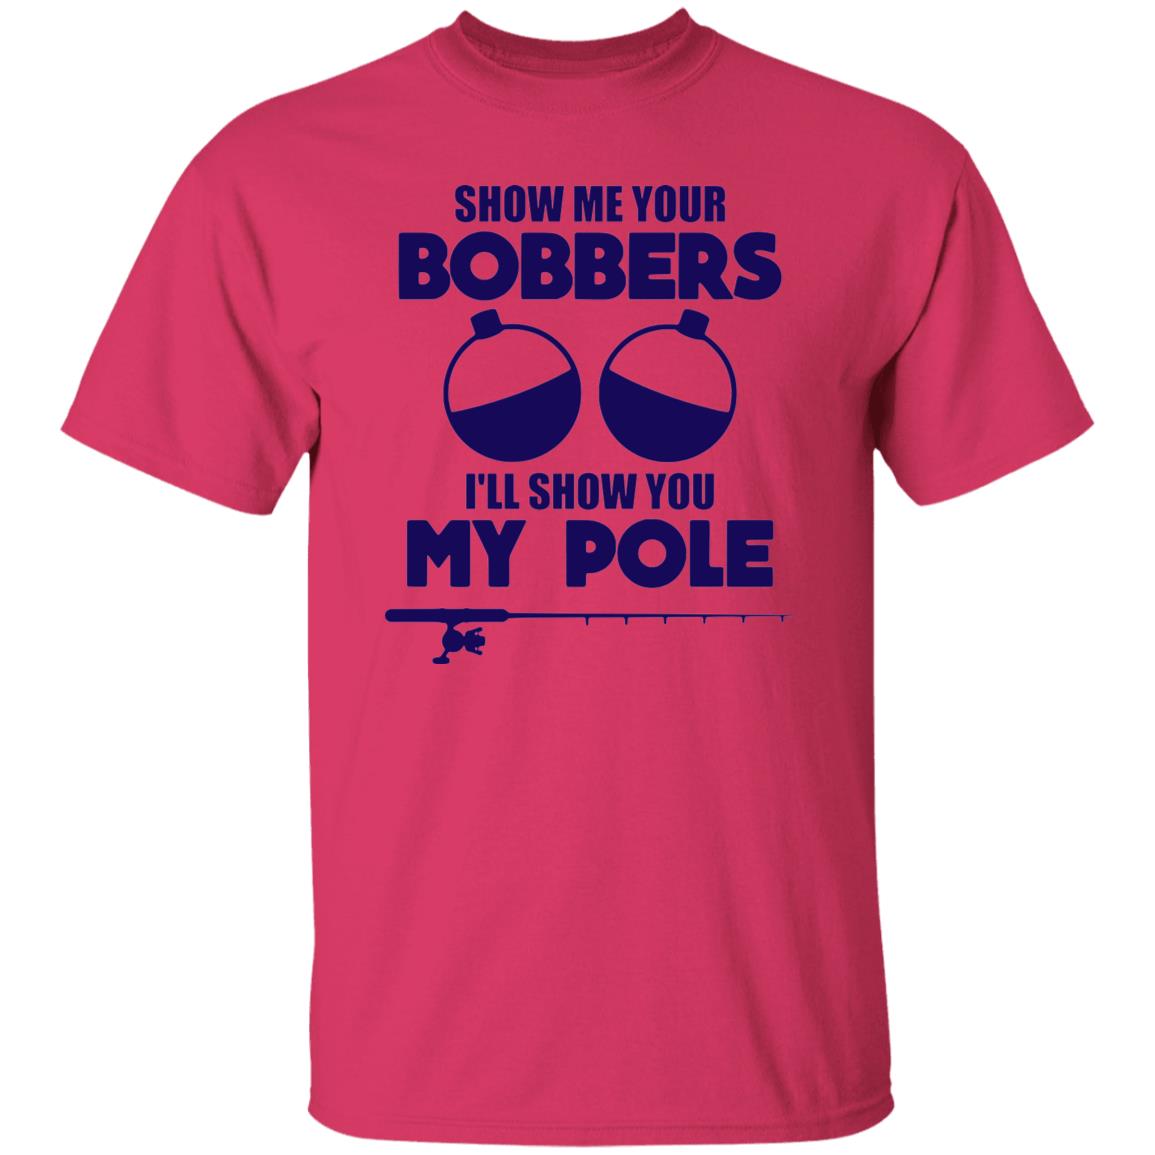 HRCL FL - Navy Show Me Your Bobbers I'll Show You My Pole - 2 Sided G500 5.3 oz. T-Shirt